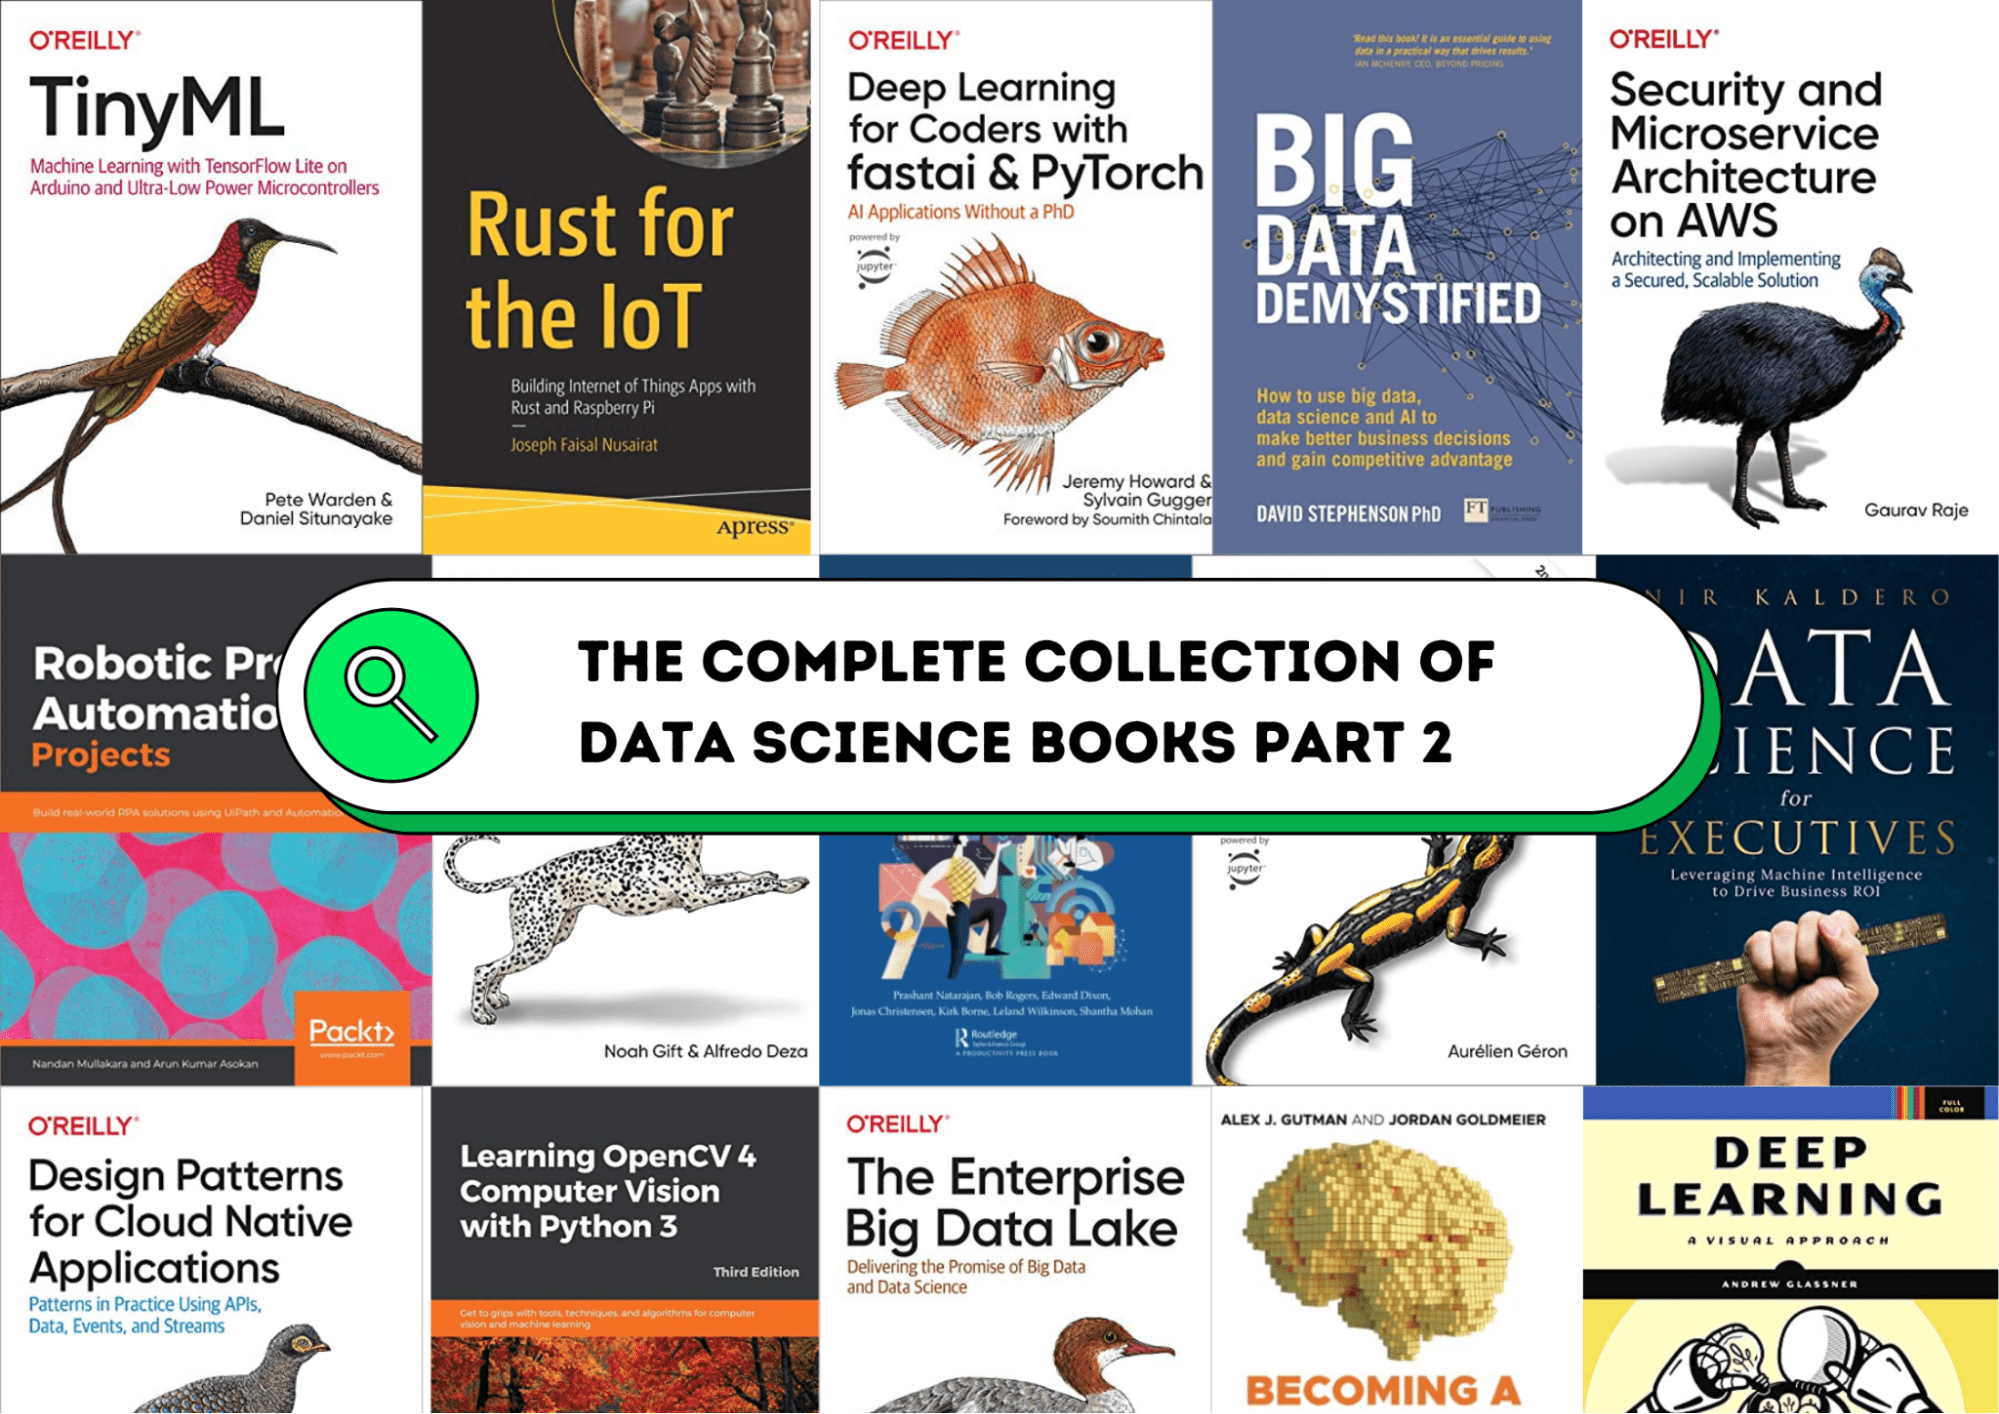 The Complete Collection of Data Science Books - Part 2